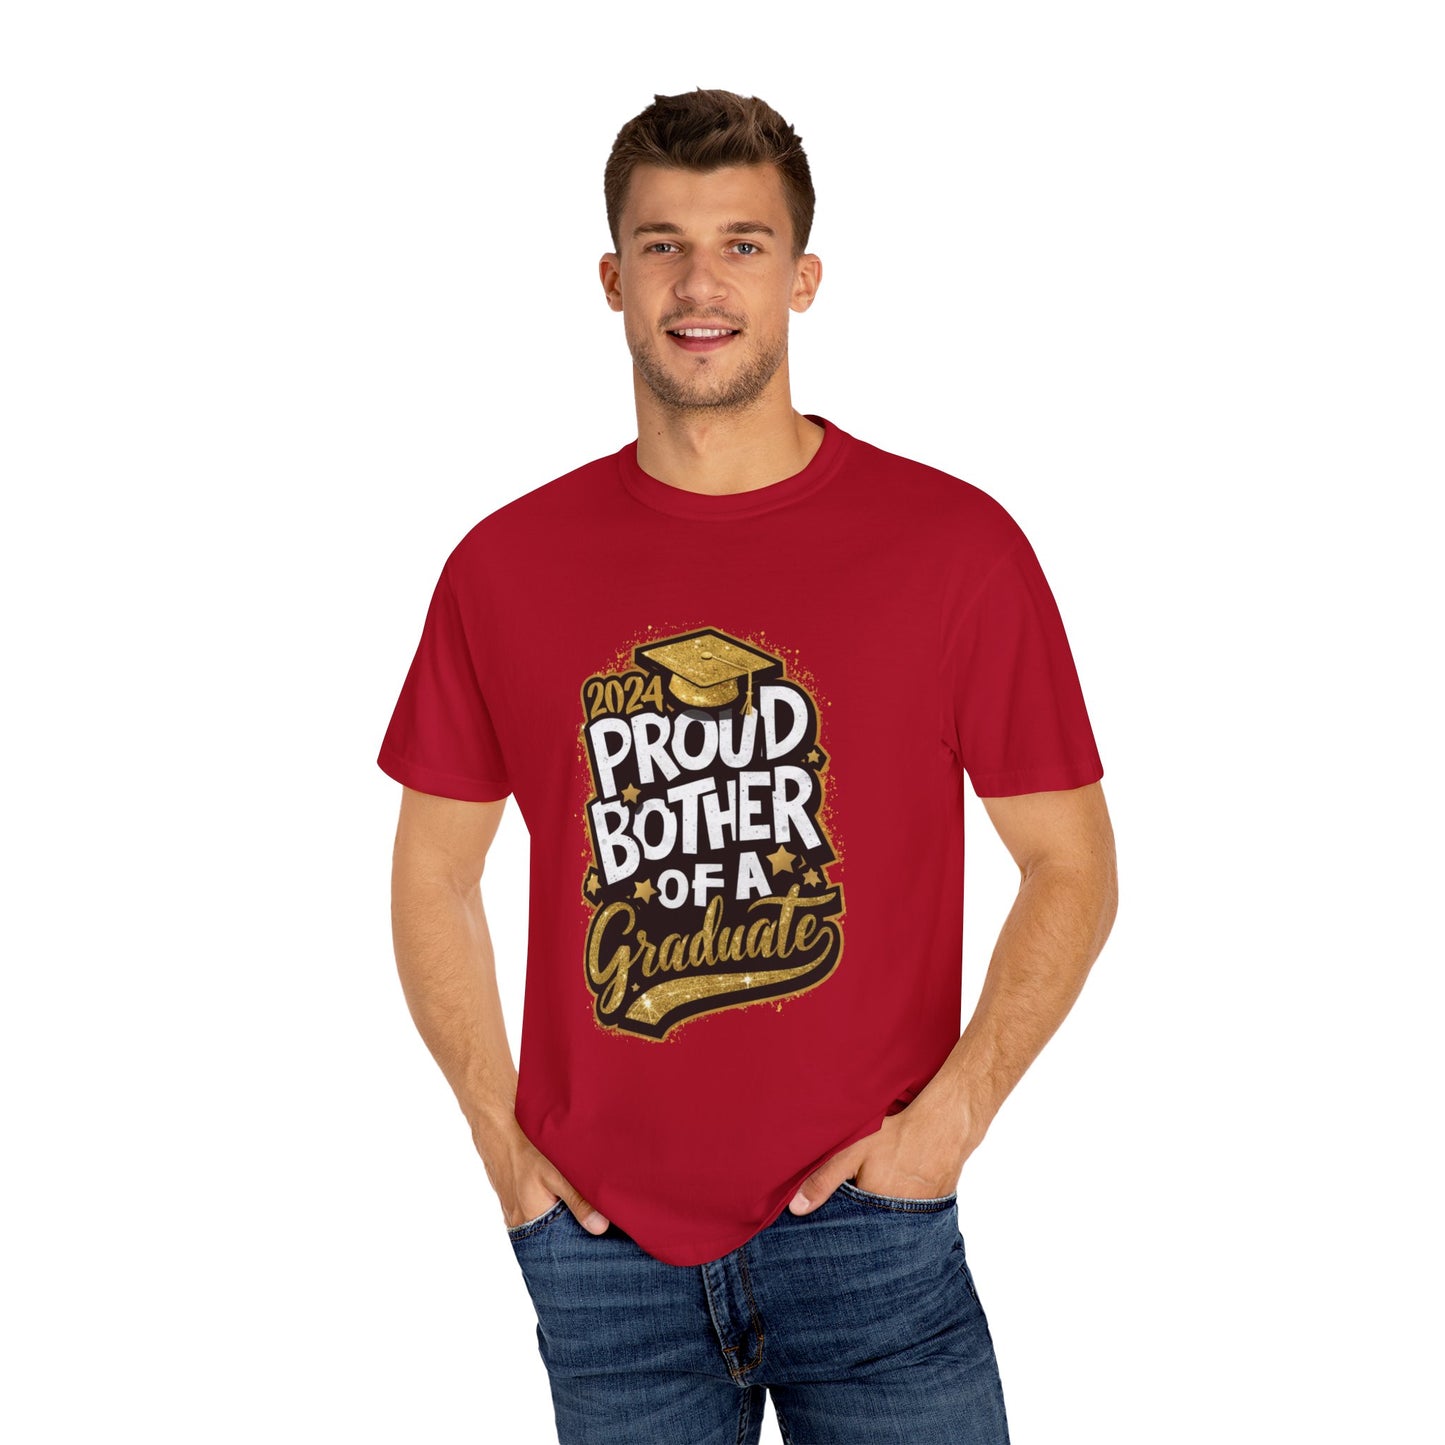 Proud Brother of a 2024 Graduate Unisex Garment-dyed T-shirt Cotton Funny Humorous Graphic Soft Premium Unisex Men Women Red T-shirt Birthday Gift-21